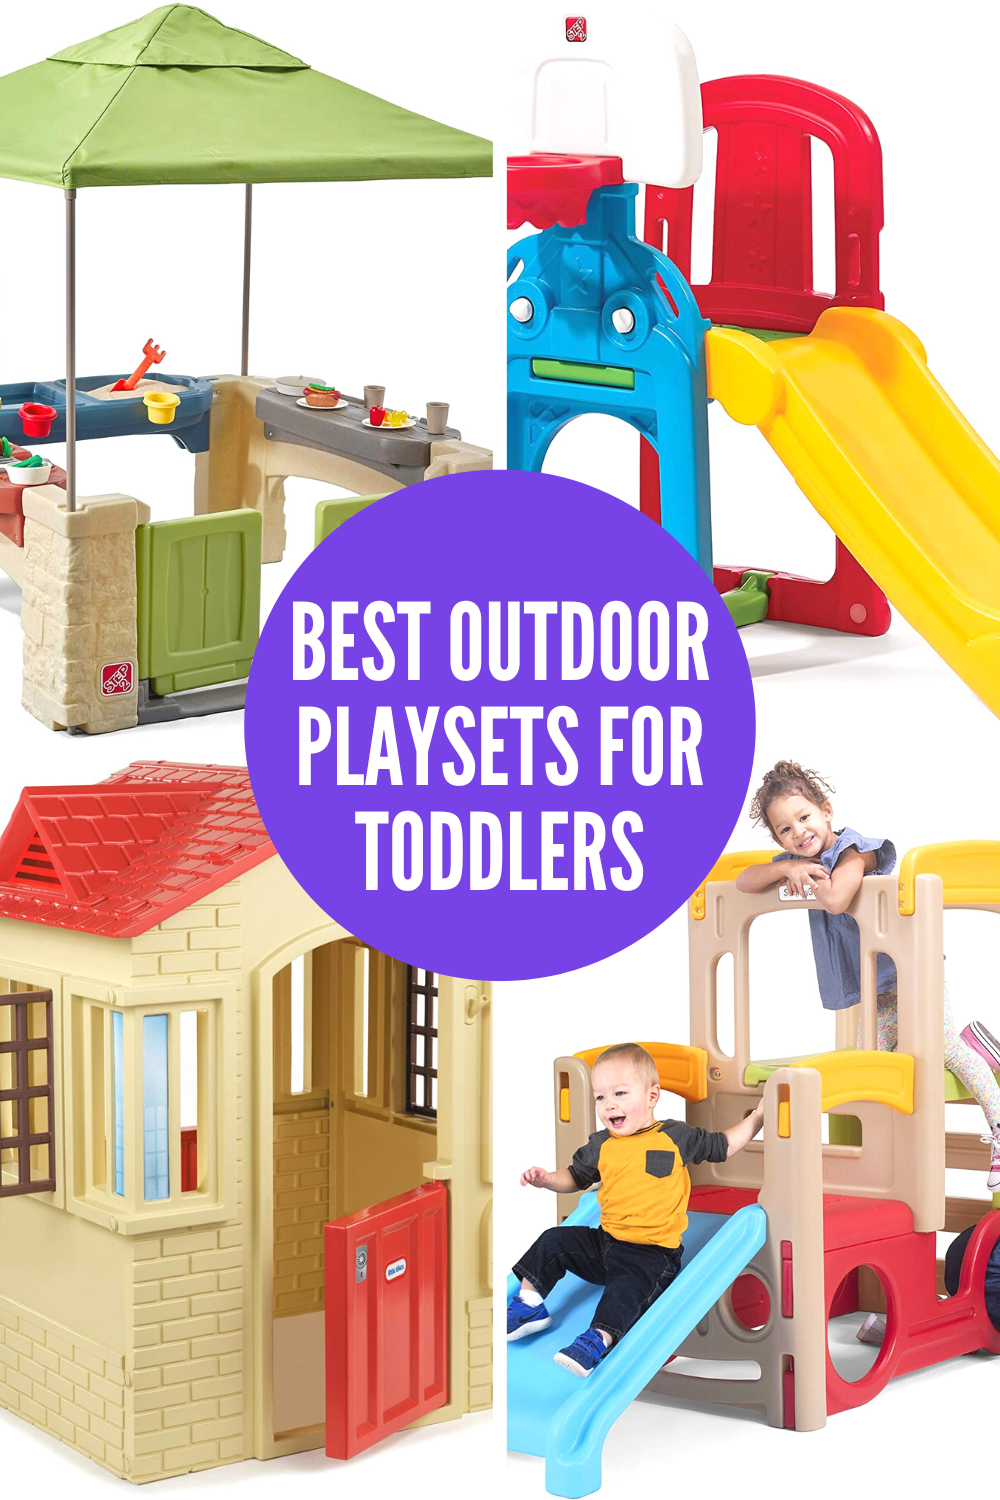 Best Outdoor Playsets for Toddlers